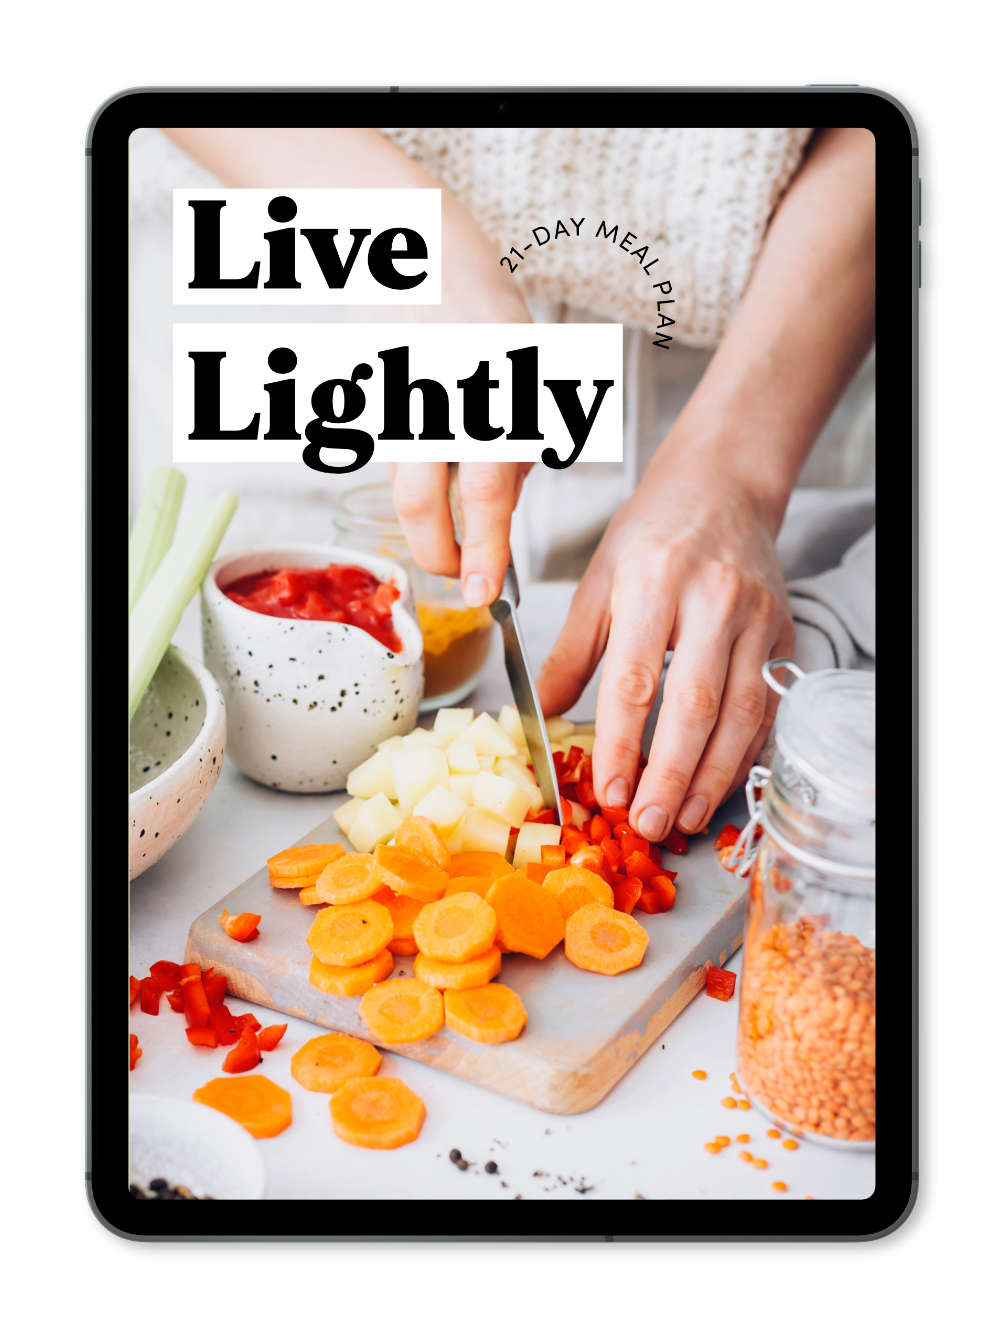 iPad Showcasing the Live Lightly Meal Plan